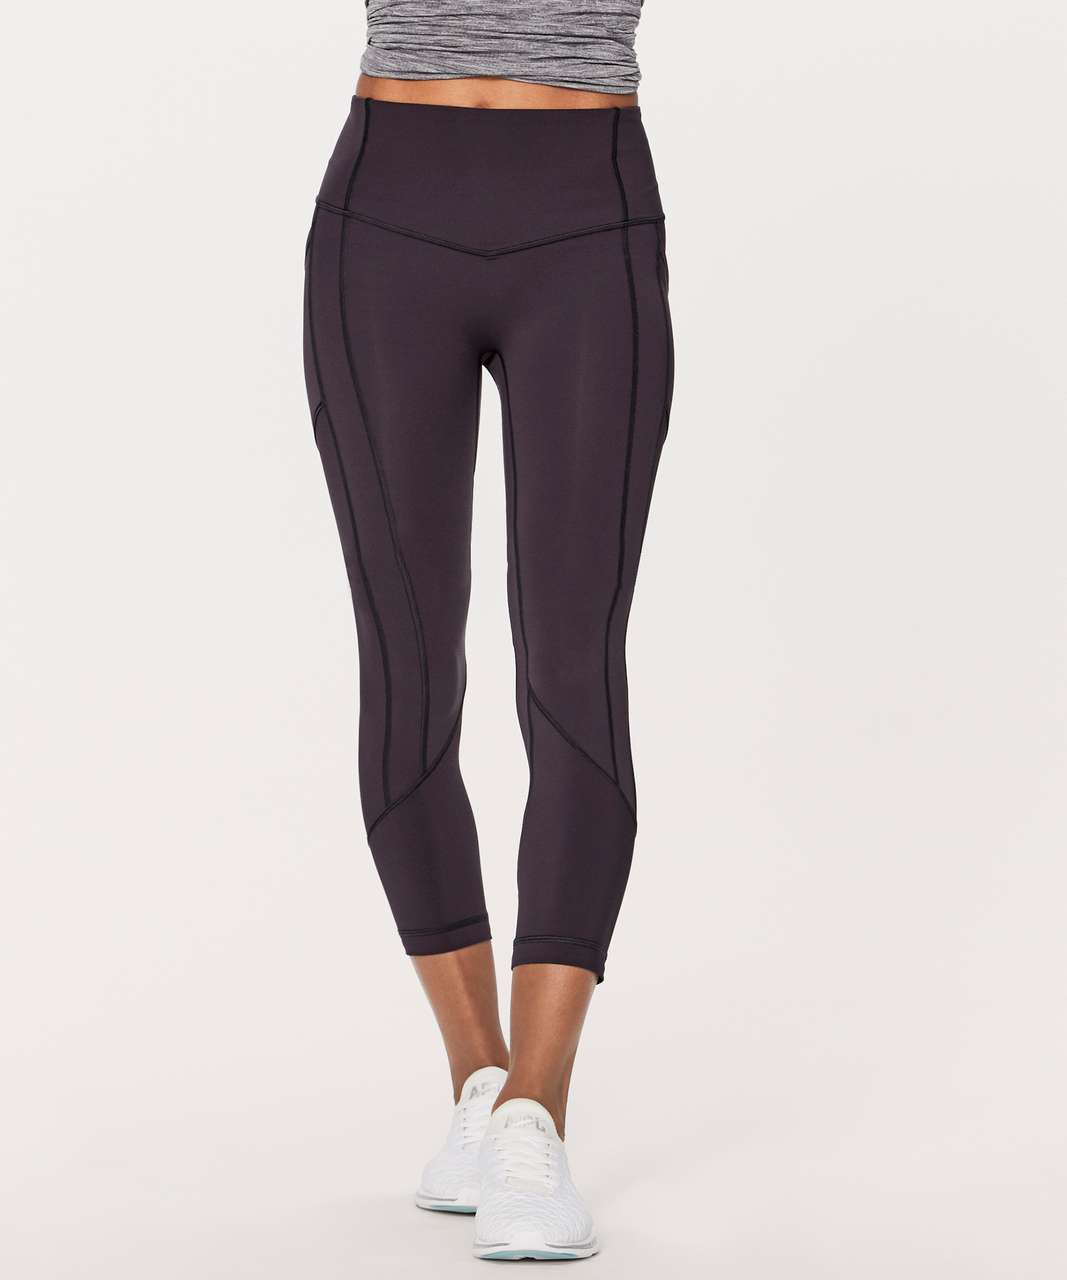 https://media.karousell.com/media/photos/products/2021/3/12/lululemon_all_the_right_places_1615558674_ade31286.jpg